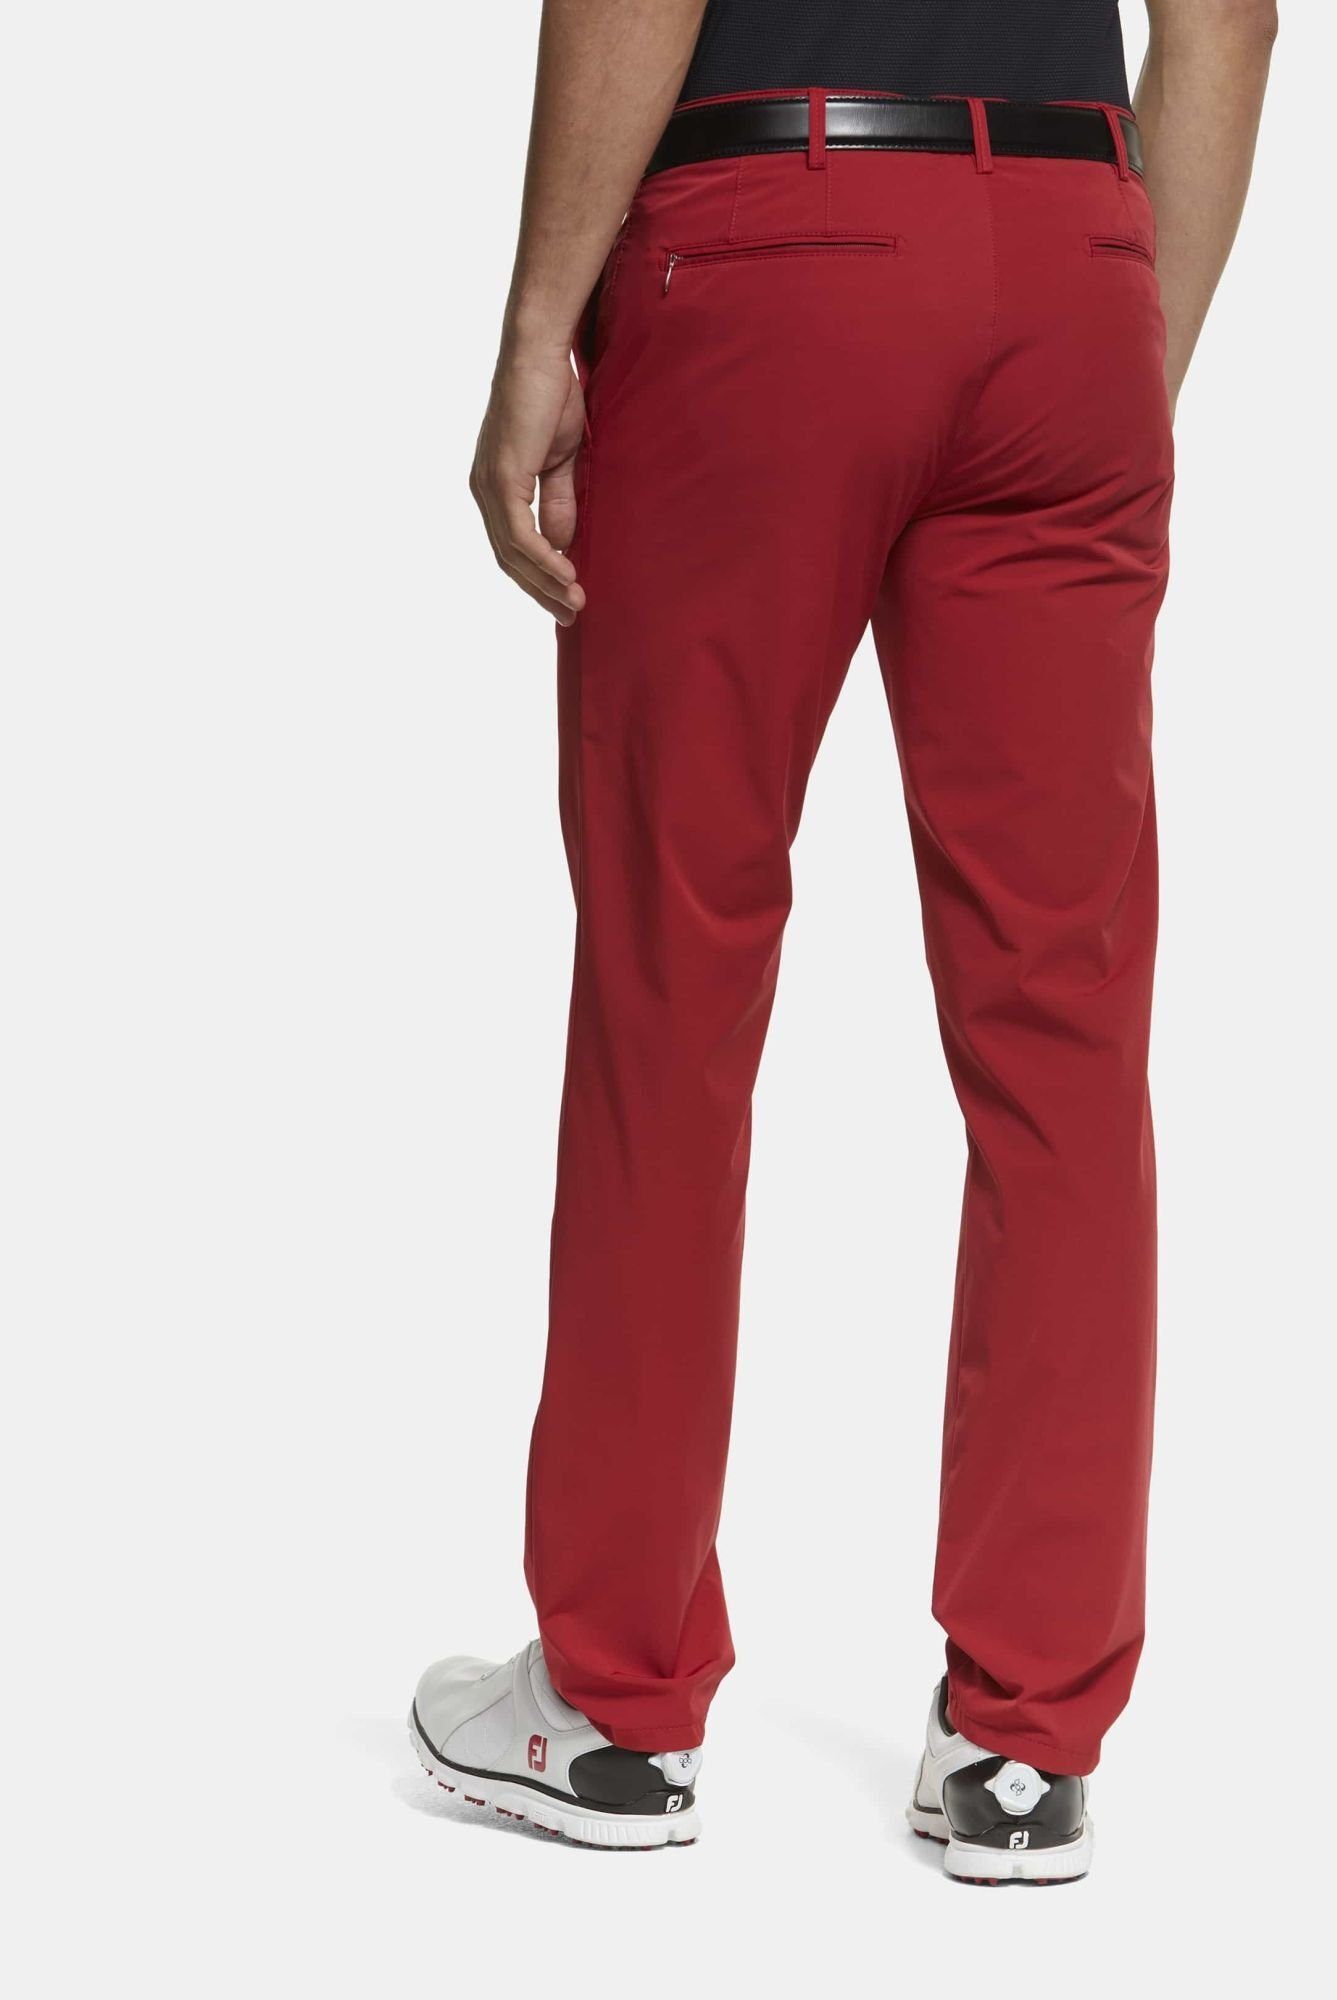 Augusta MEYER Performance rot High Chinohose 4-Way-Stretch